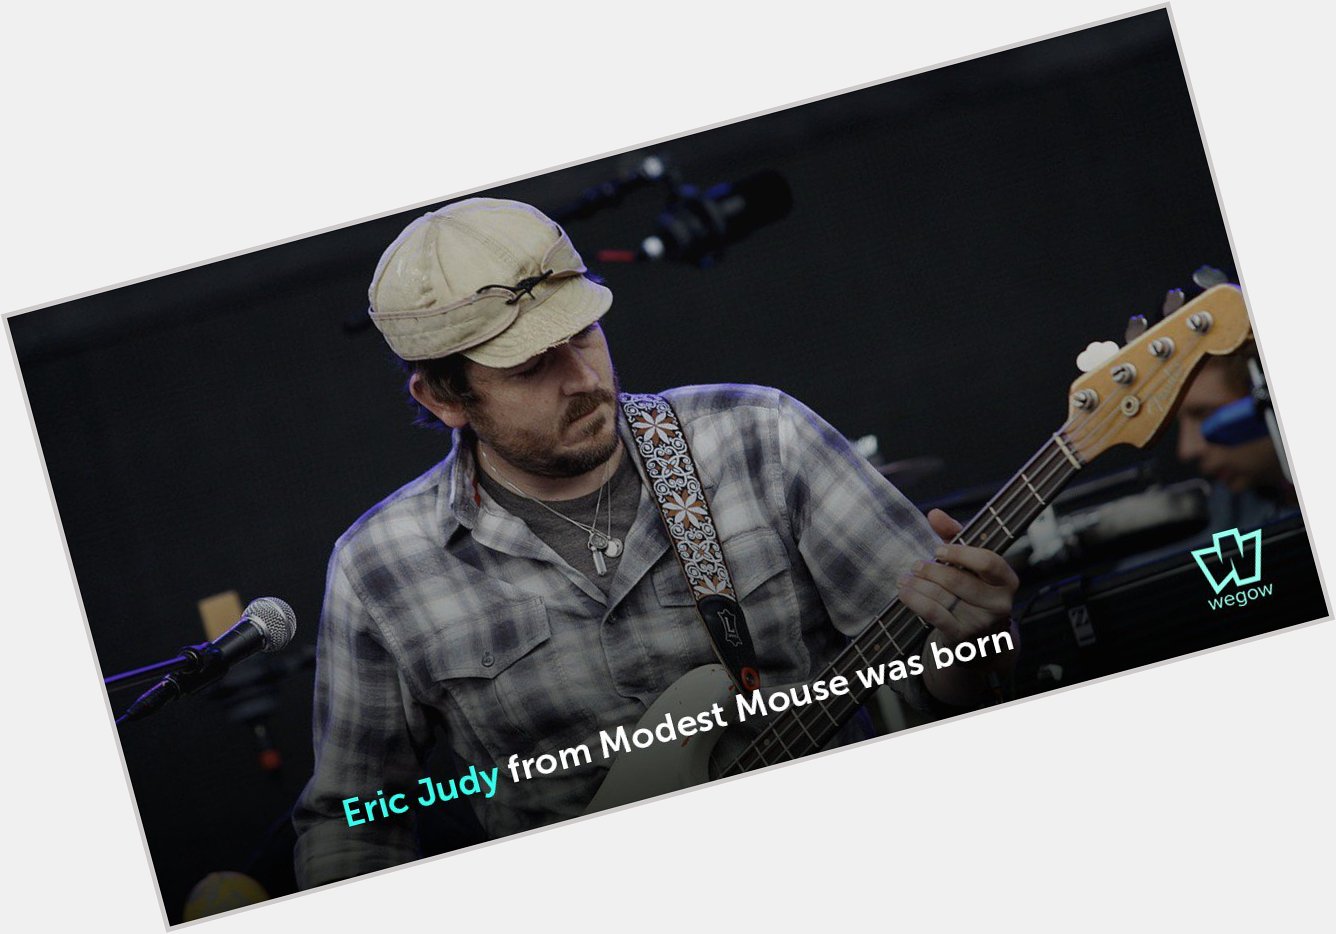 43 years ago Eric Judy from Modest Mouse was born. Happy Birthday!  